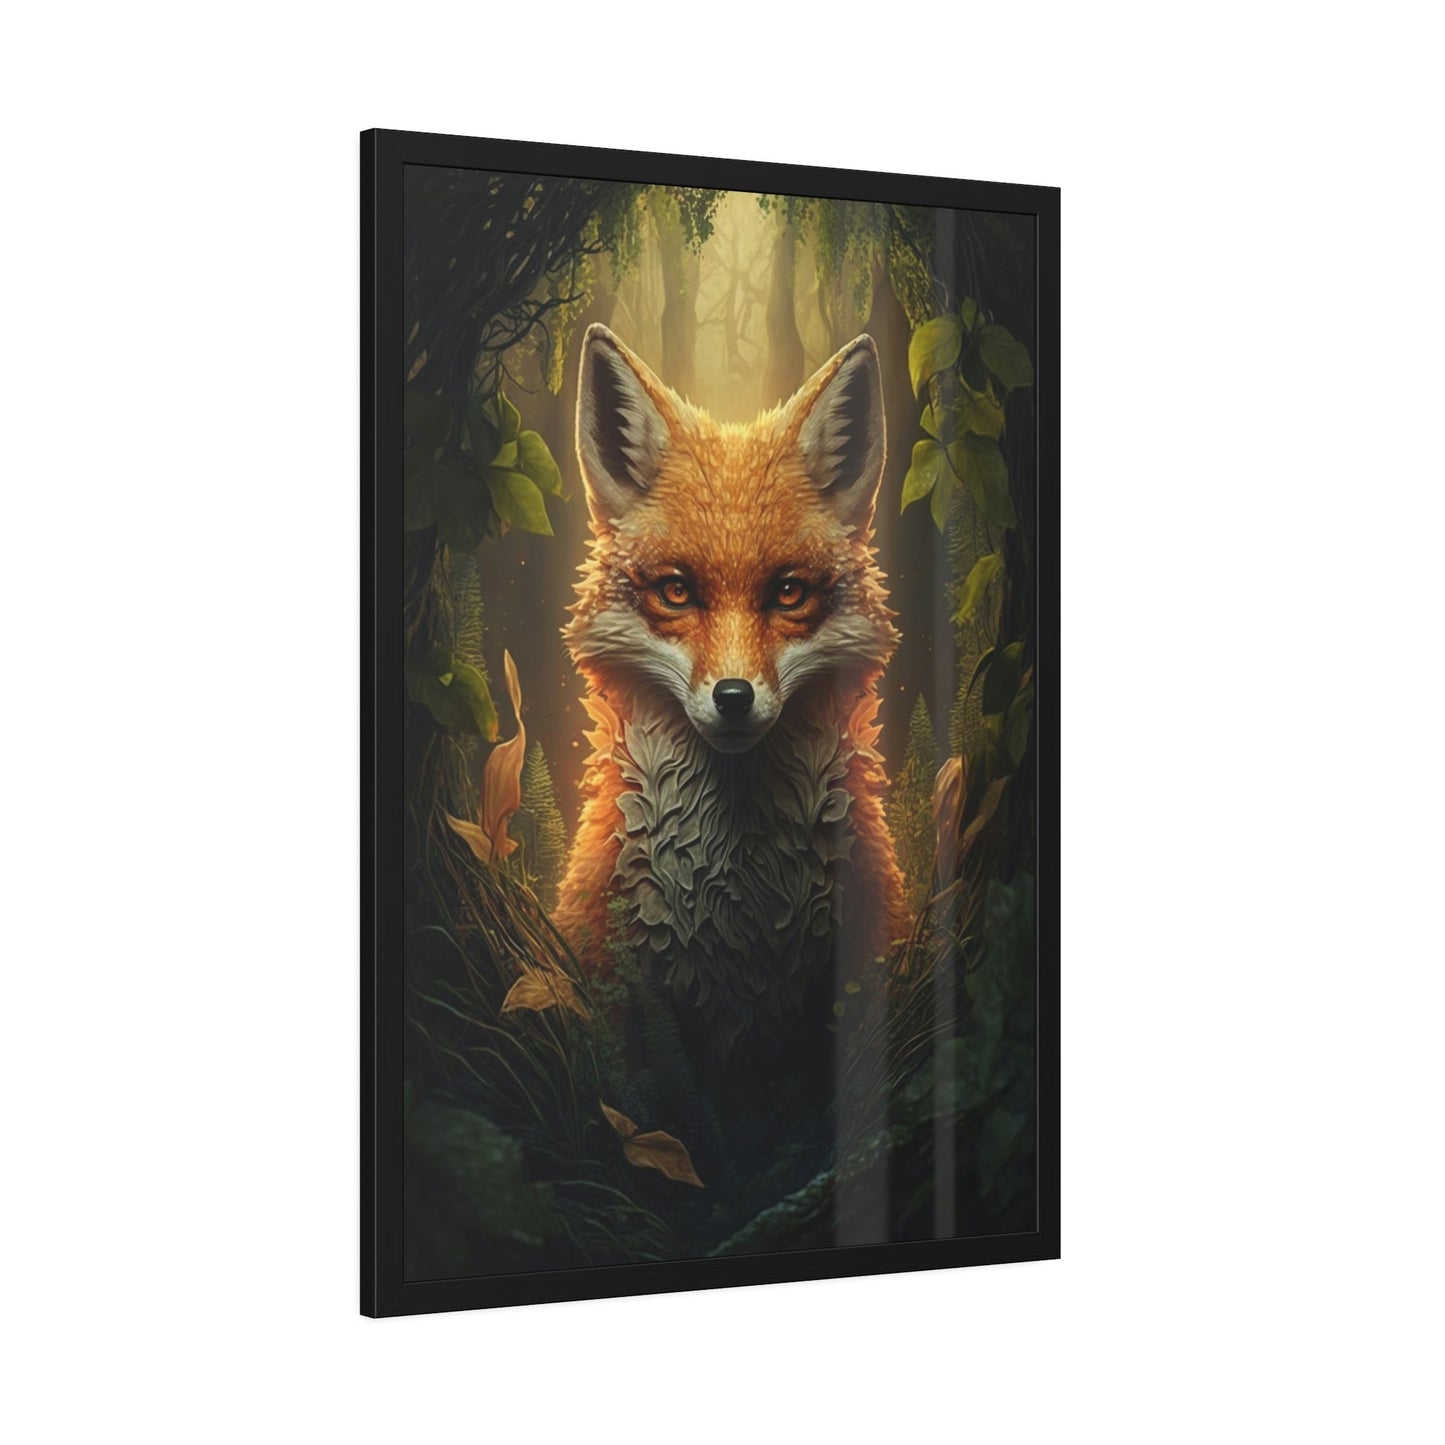 The Majestic Fox: A Proud Guardian of the Forest Realm